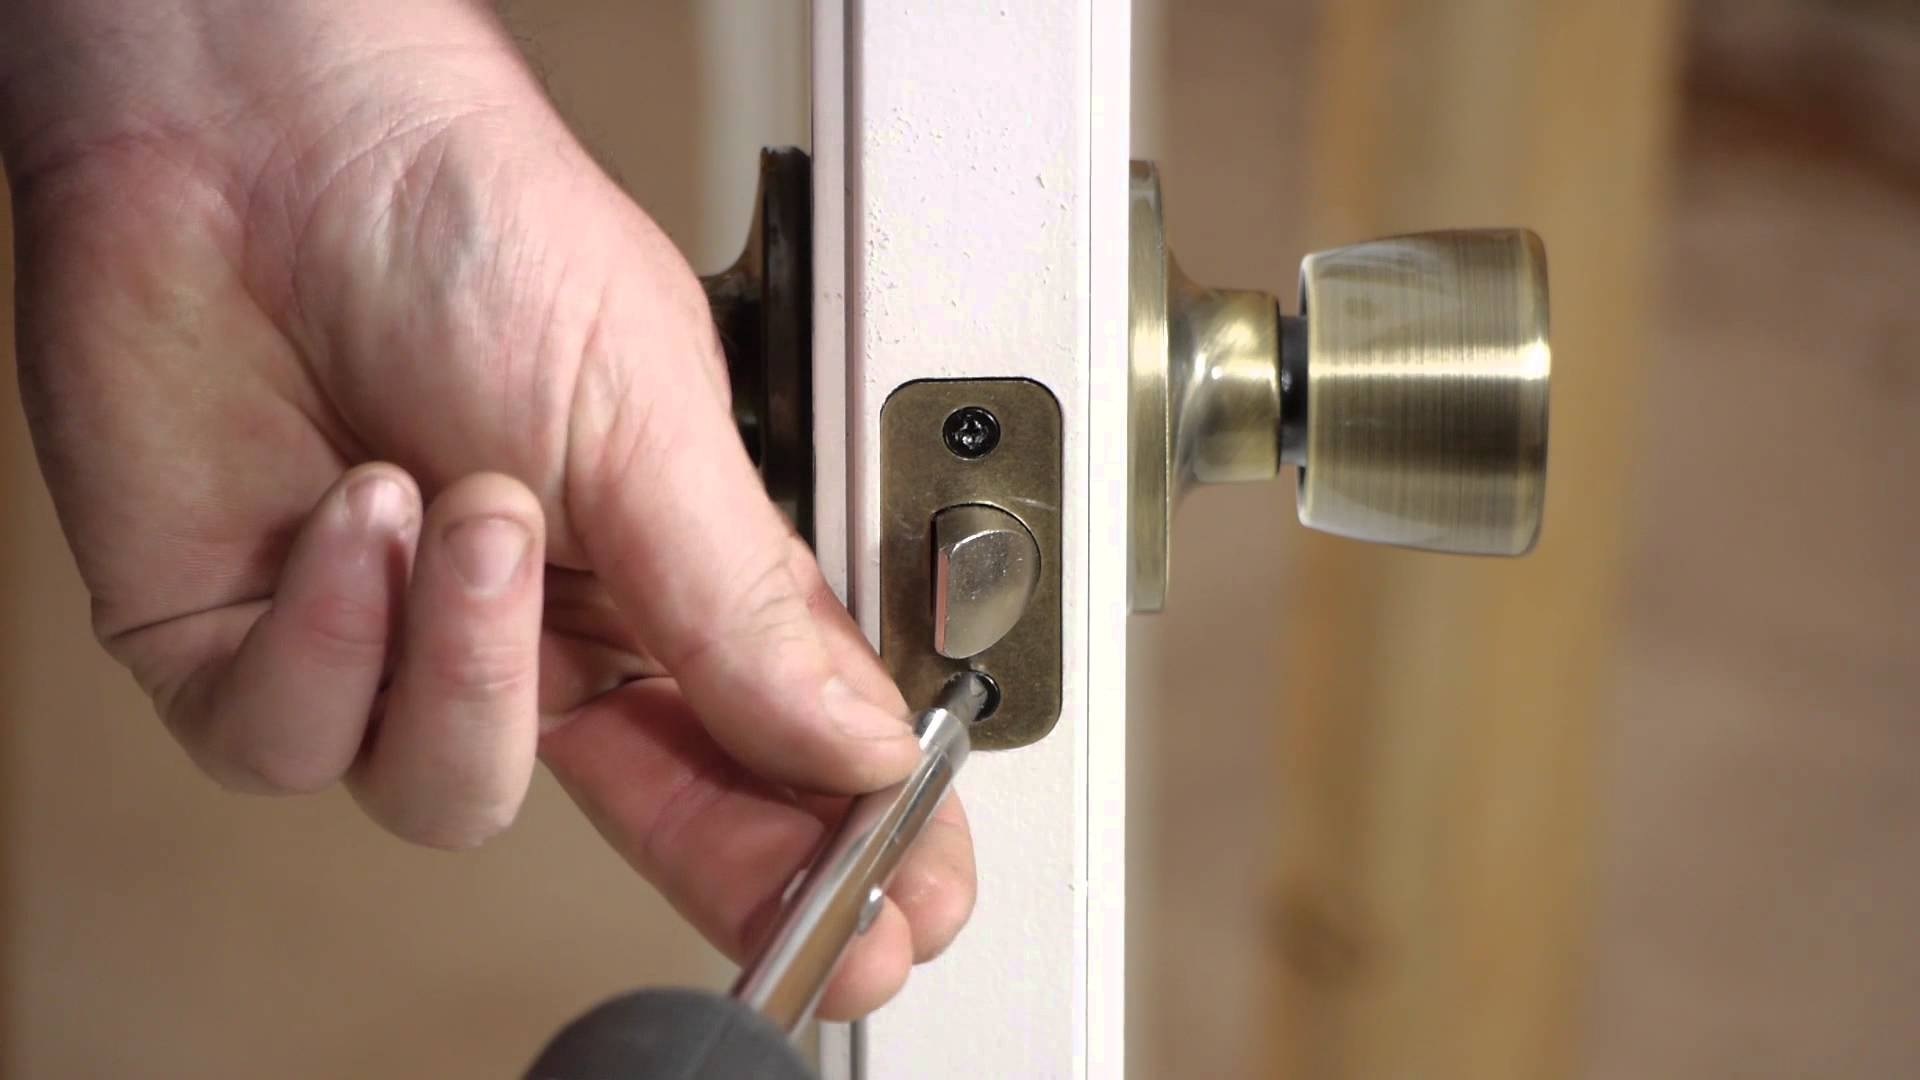 Hiring professional locksmith services can come with amazing benefits!